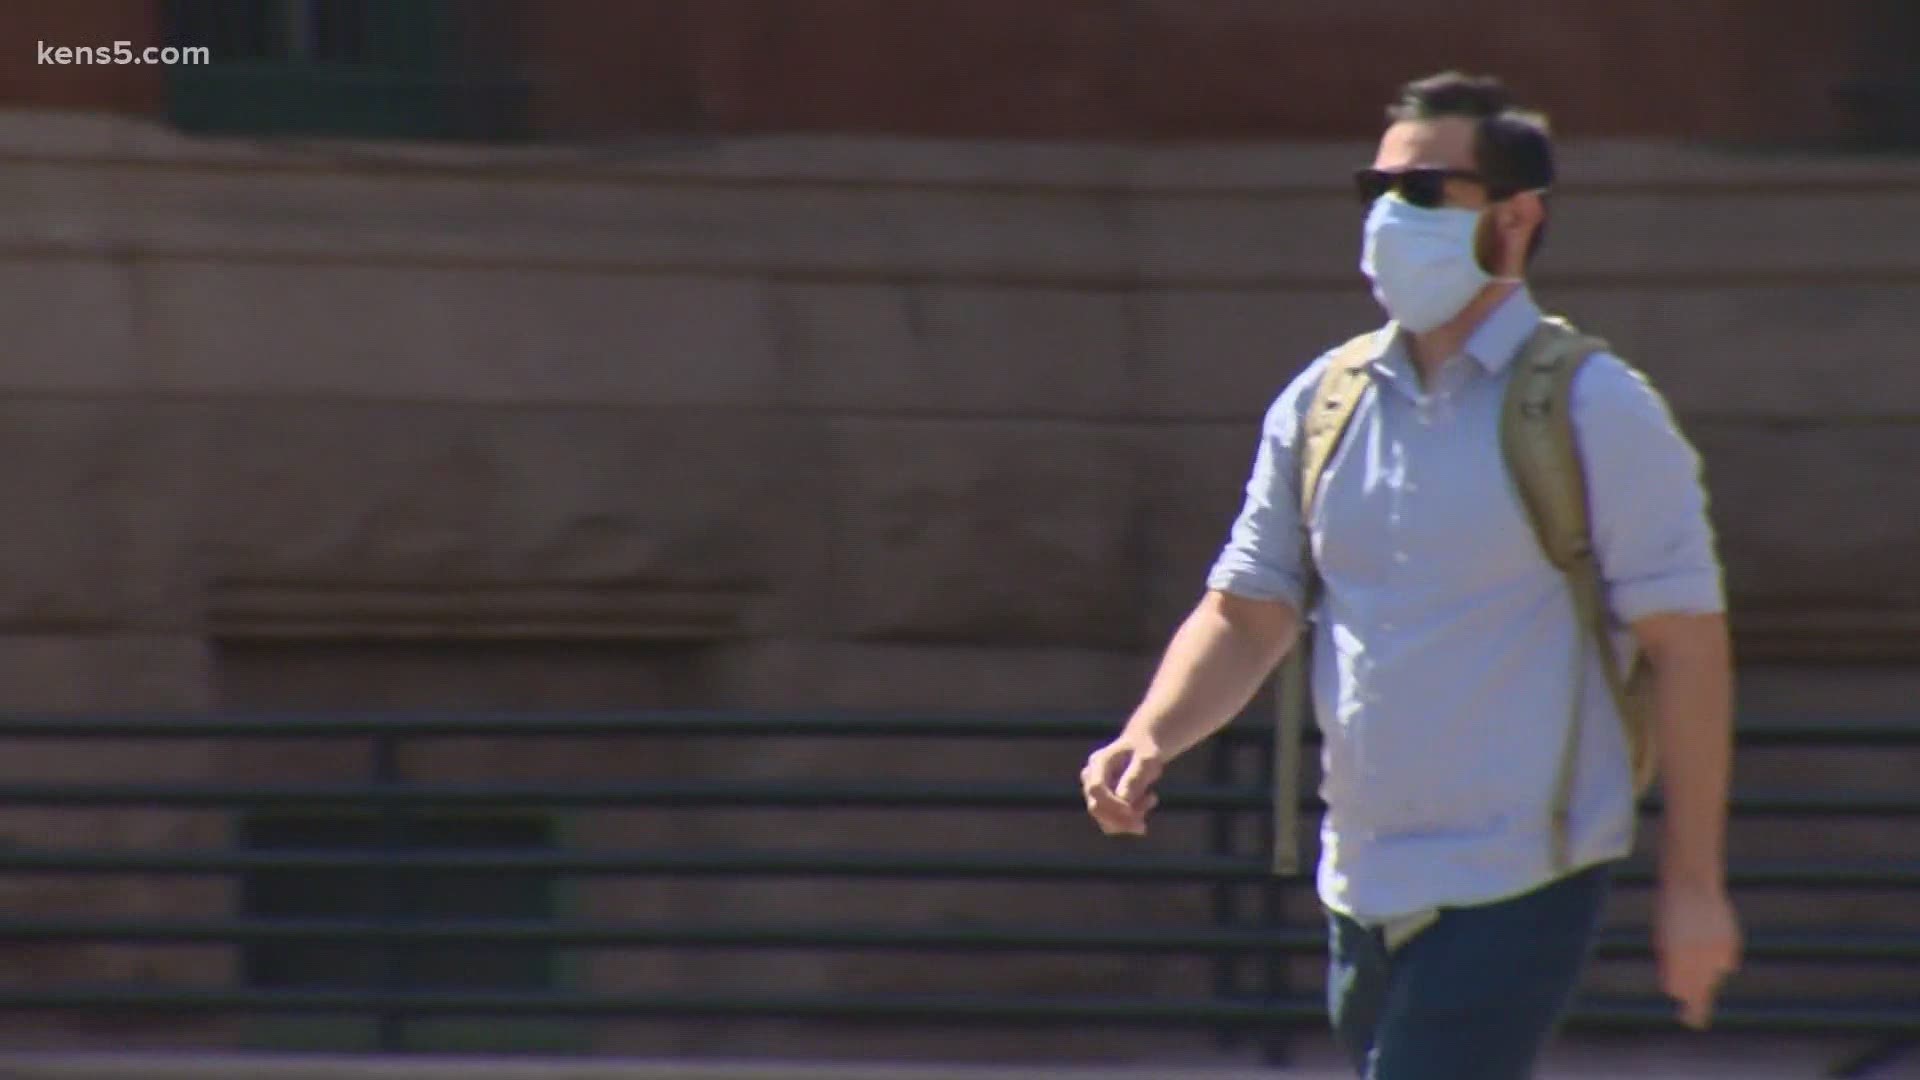 He said that because the governor only suggested masks, fewer people are wearing them and rates of infection are increasing in San Antonio and around Texas.